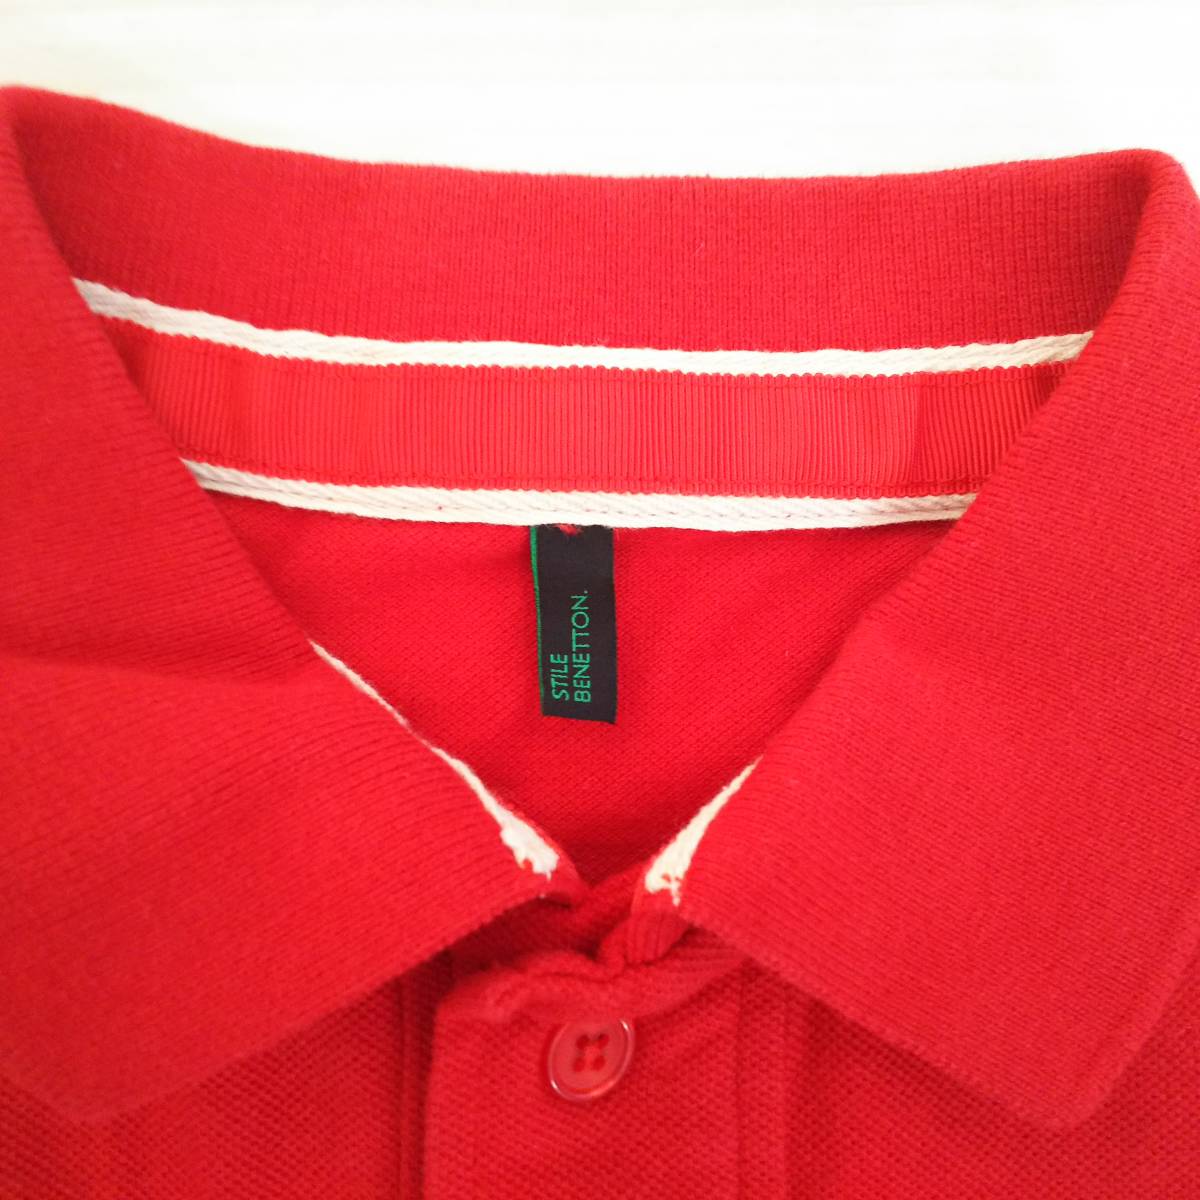 *BENETTON Benetton polo-shirt with short sleeves red M*